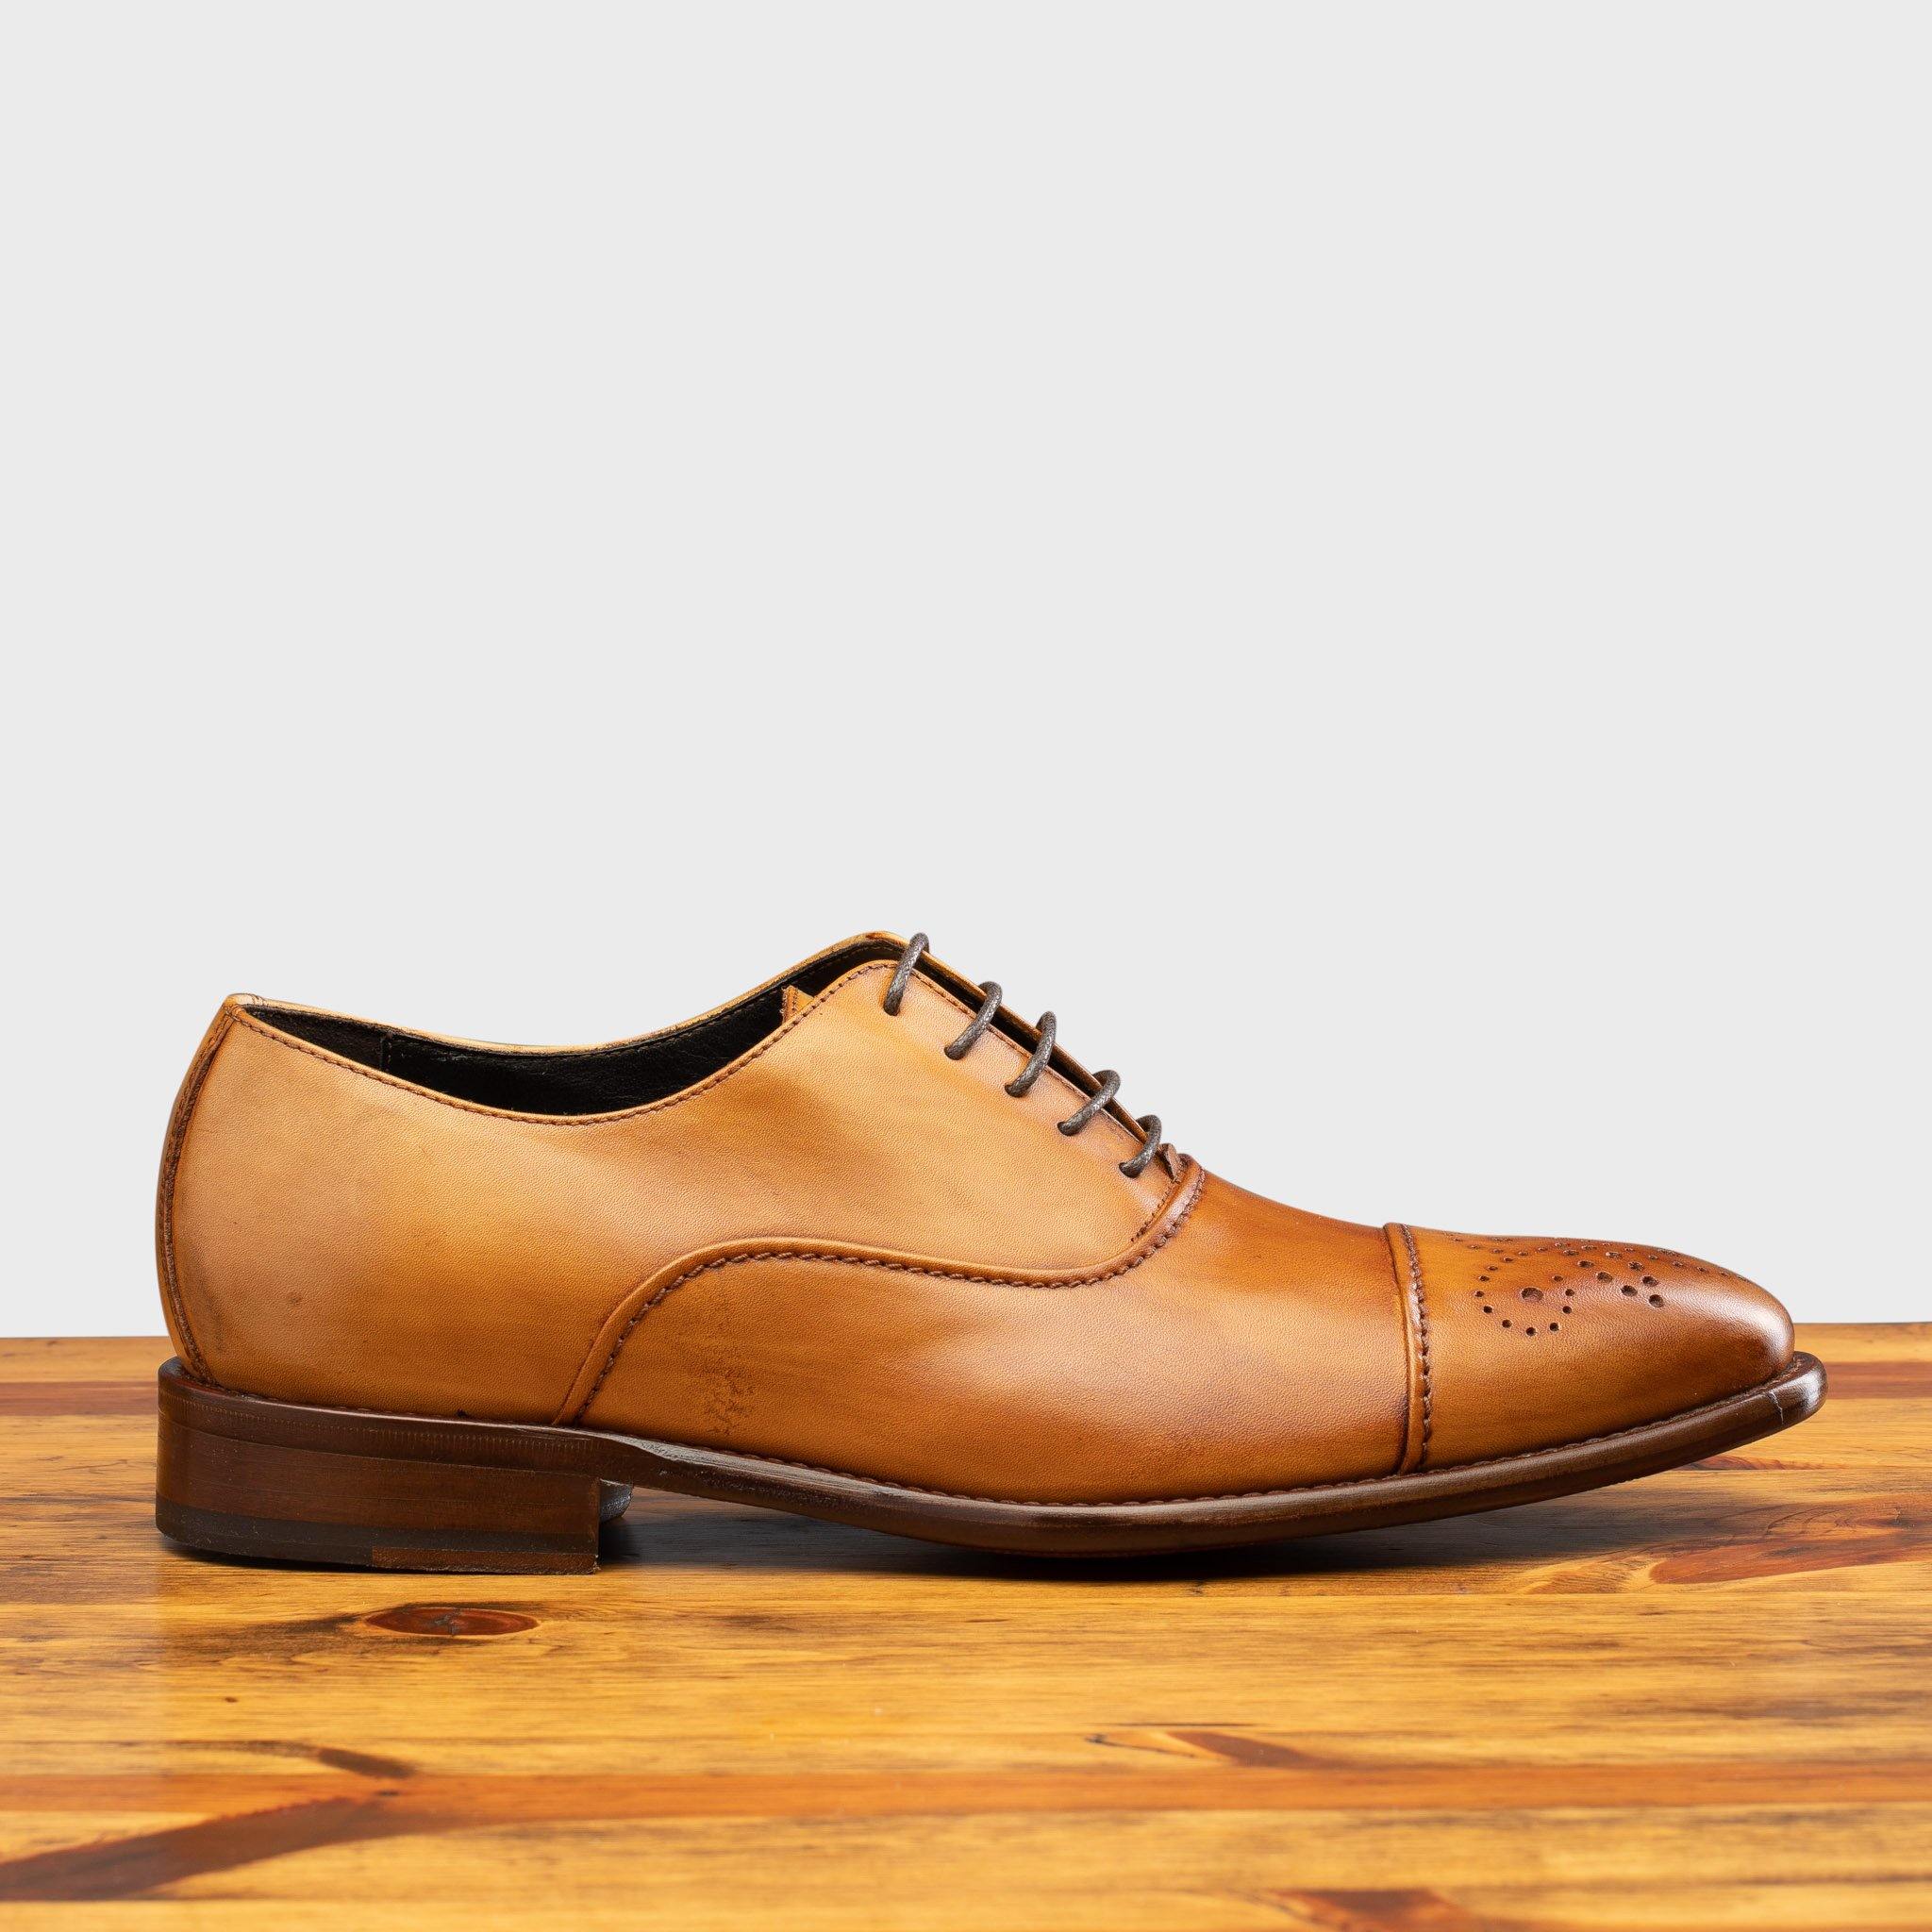 Side profile of the 2361 Calzoleria Toscana Dark Caramel  Cayenne Calf Cap-Toe on top of a wooden table